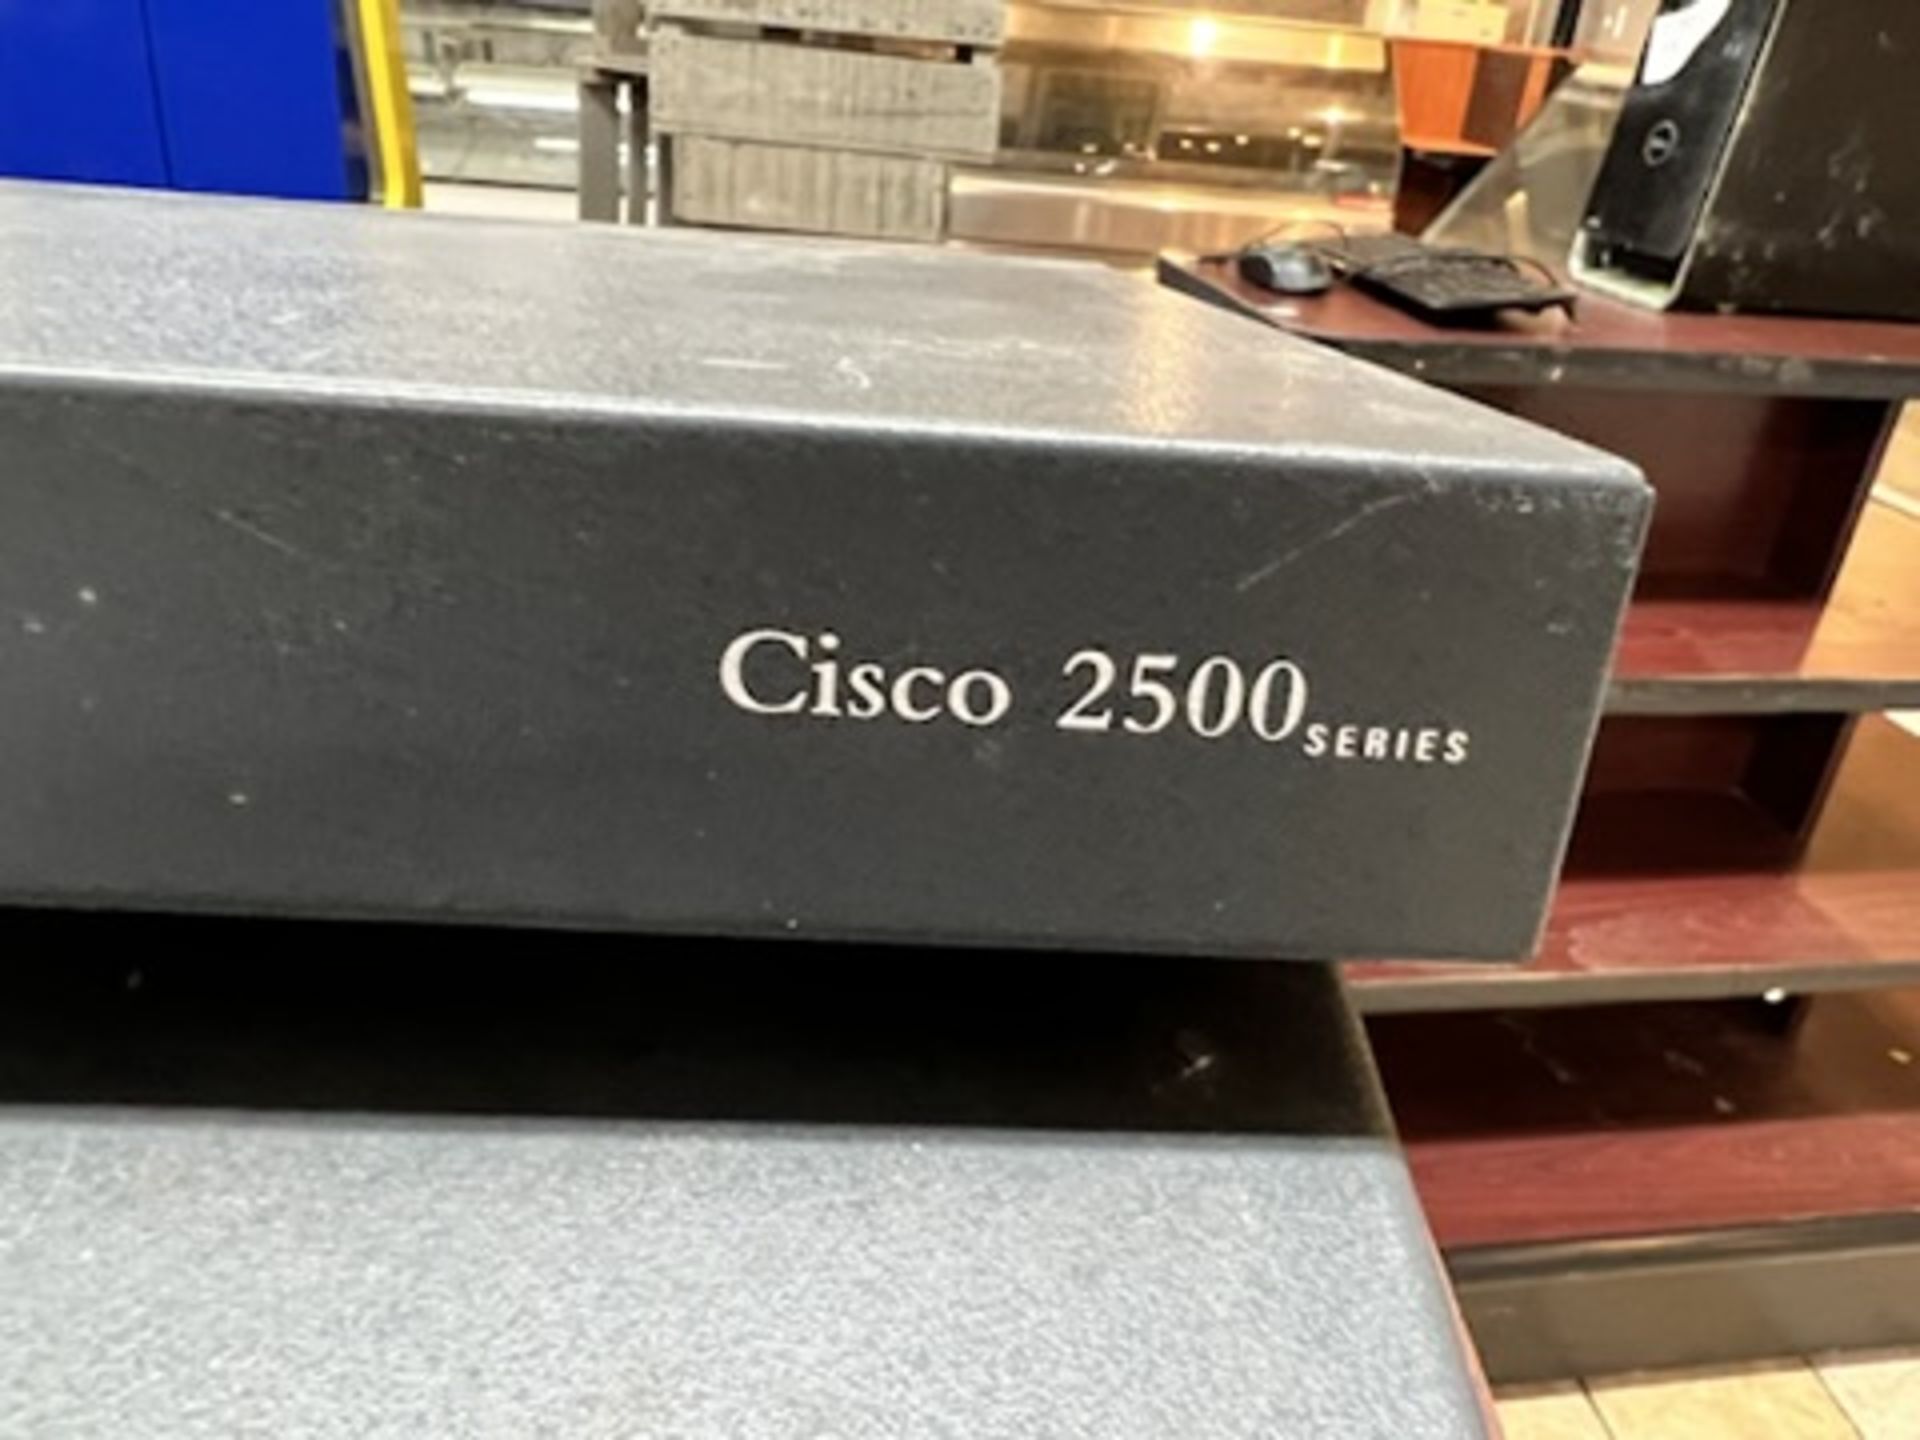 Lot of: (2) Cisco 2500 series routers , (1) Cisco IAD 2400 Series router, (2) Linksys 24-port intern - Image 2 of 18